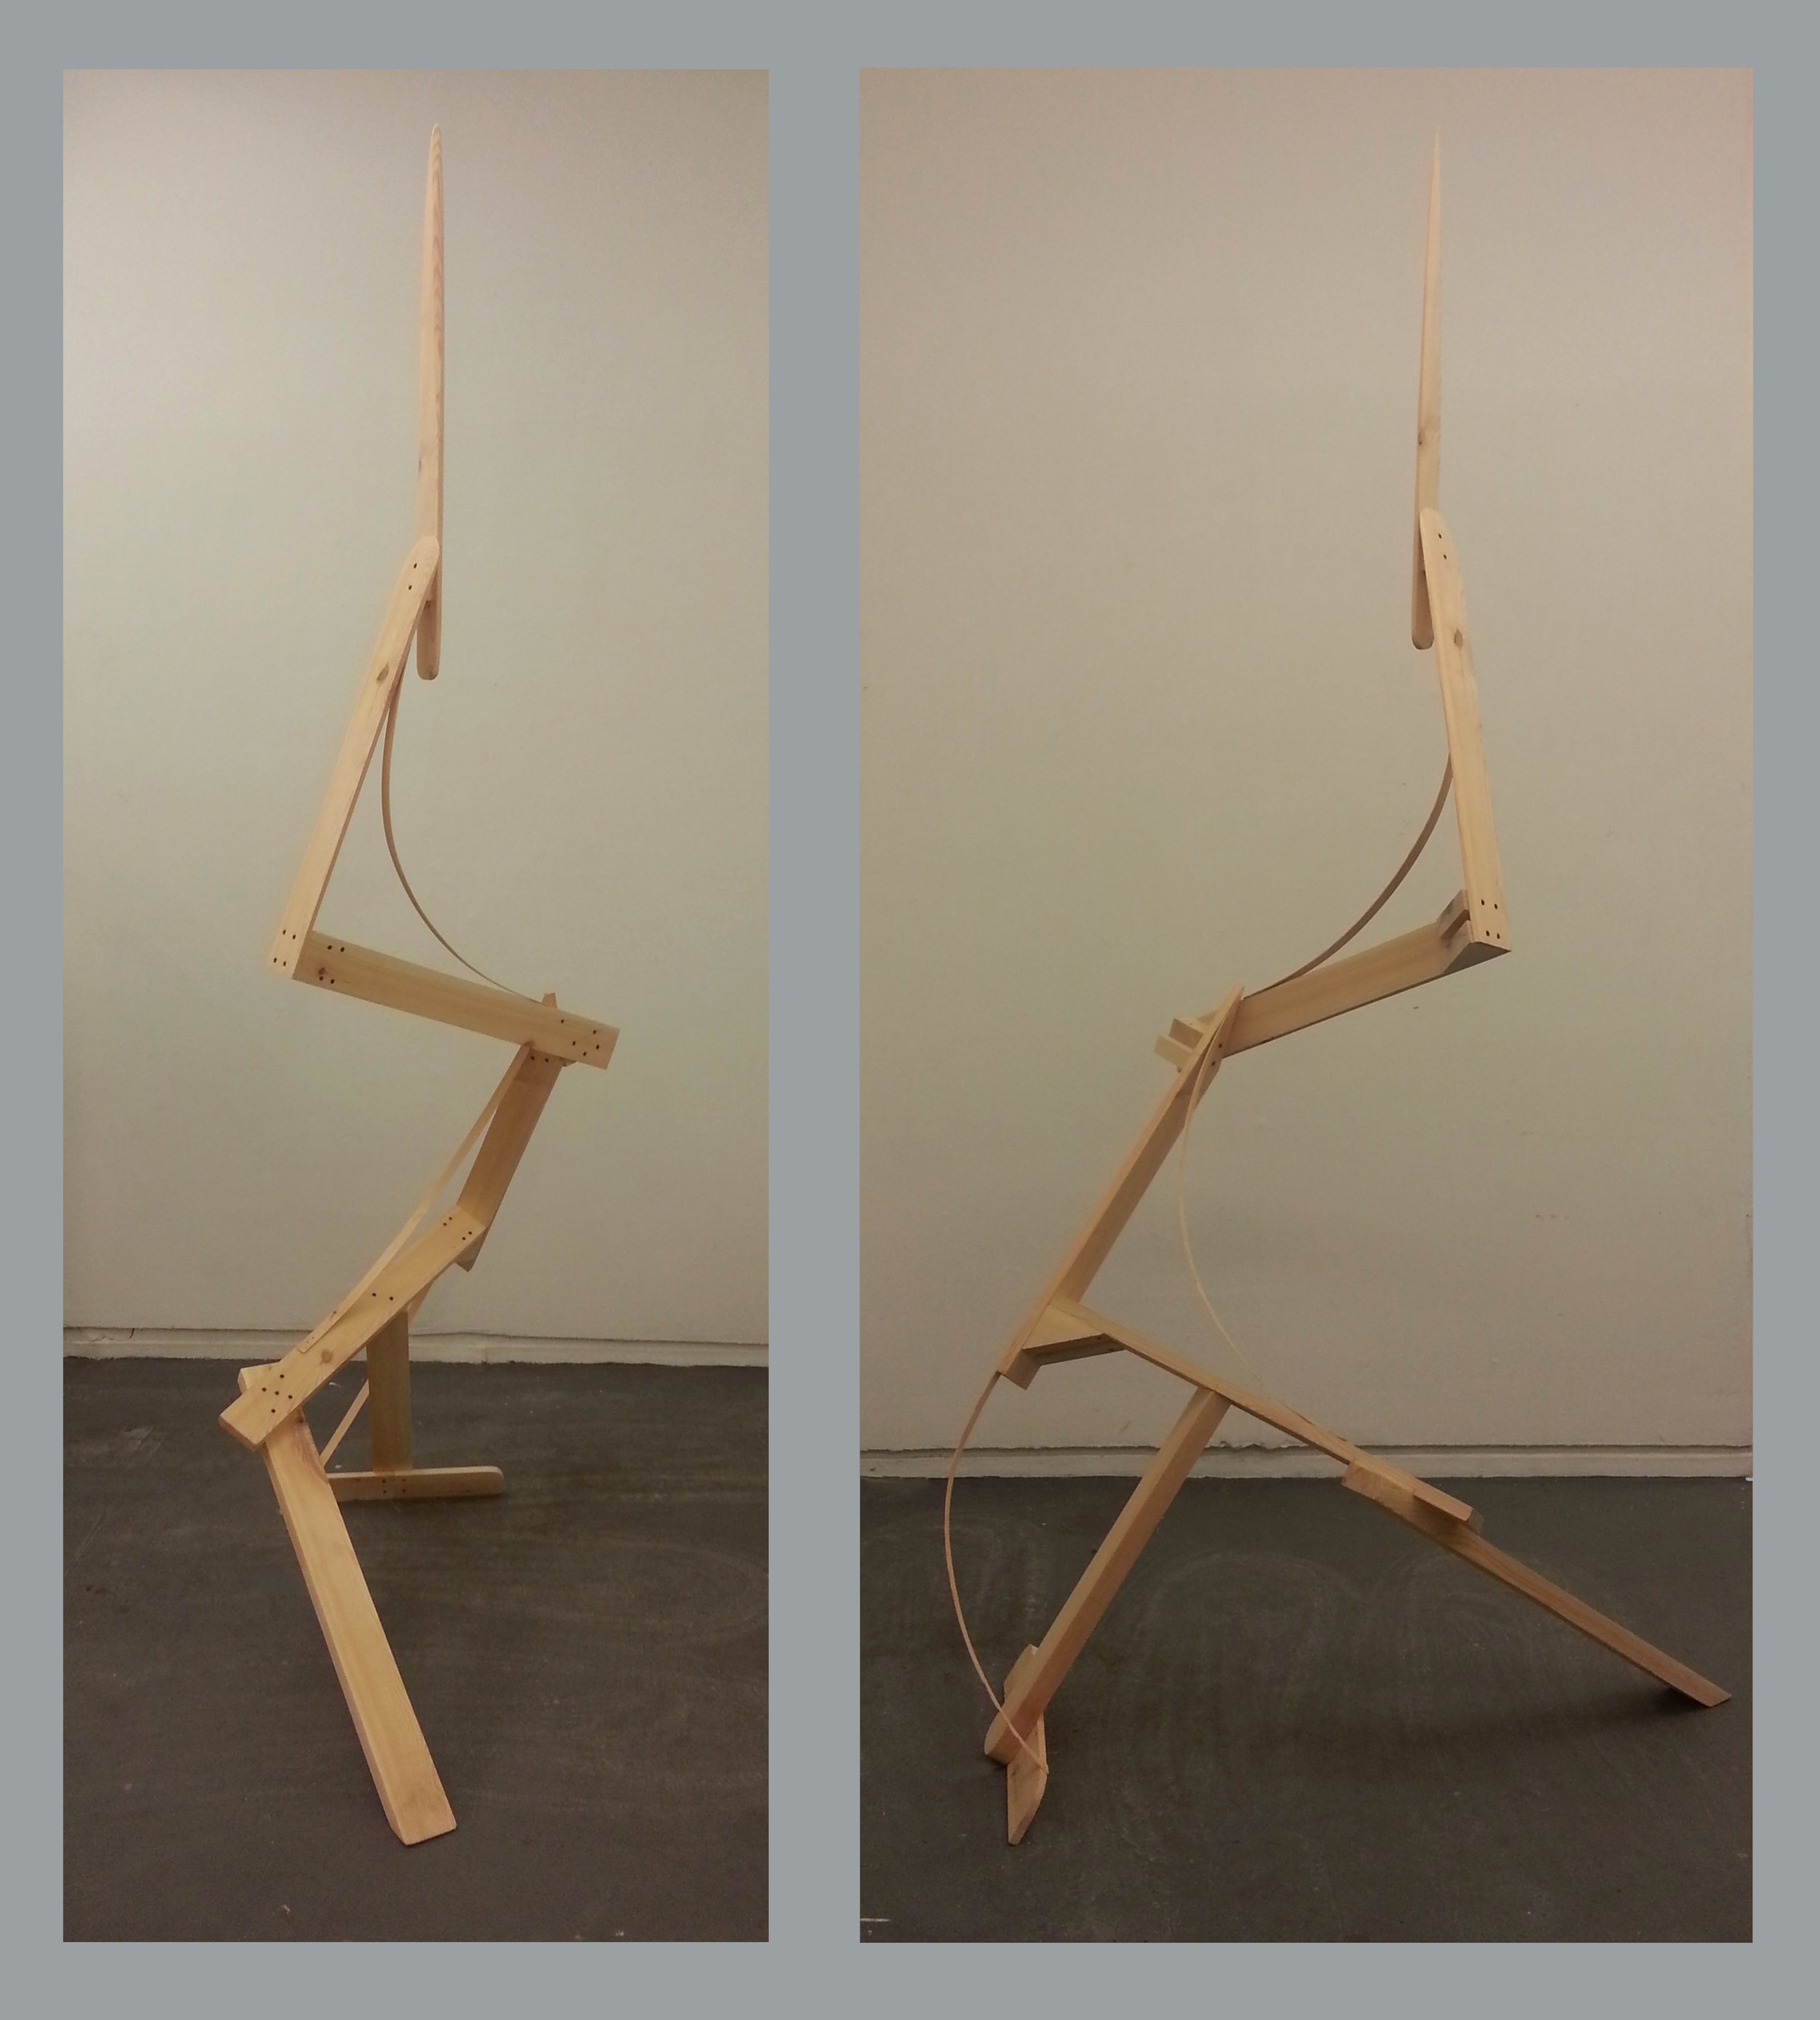  Towers Project  Sculptural Processes&nbsp;  28” x 112” x 40”  pine  2013 